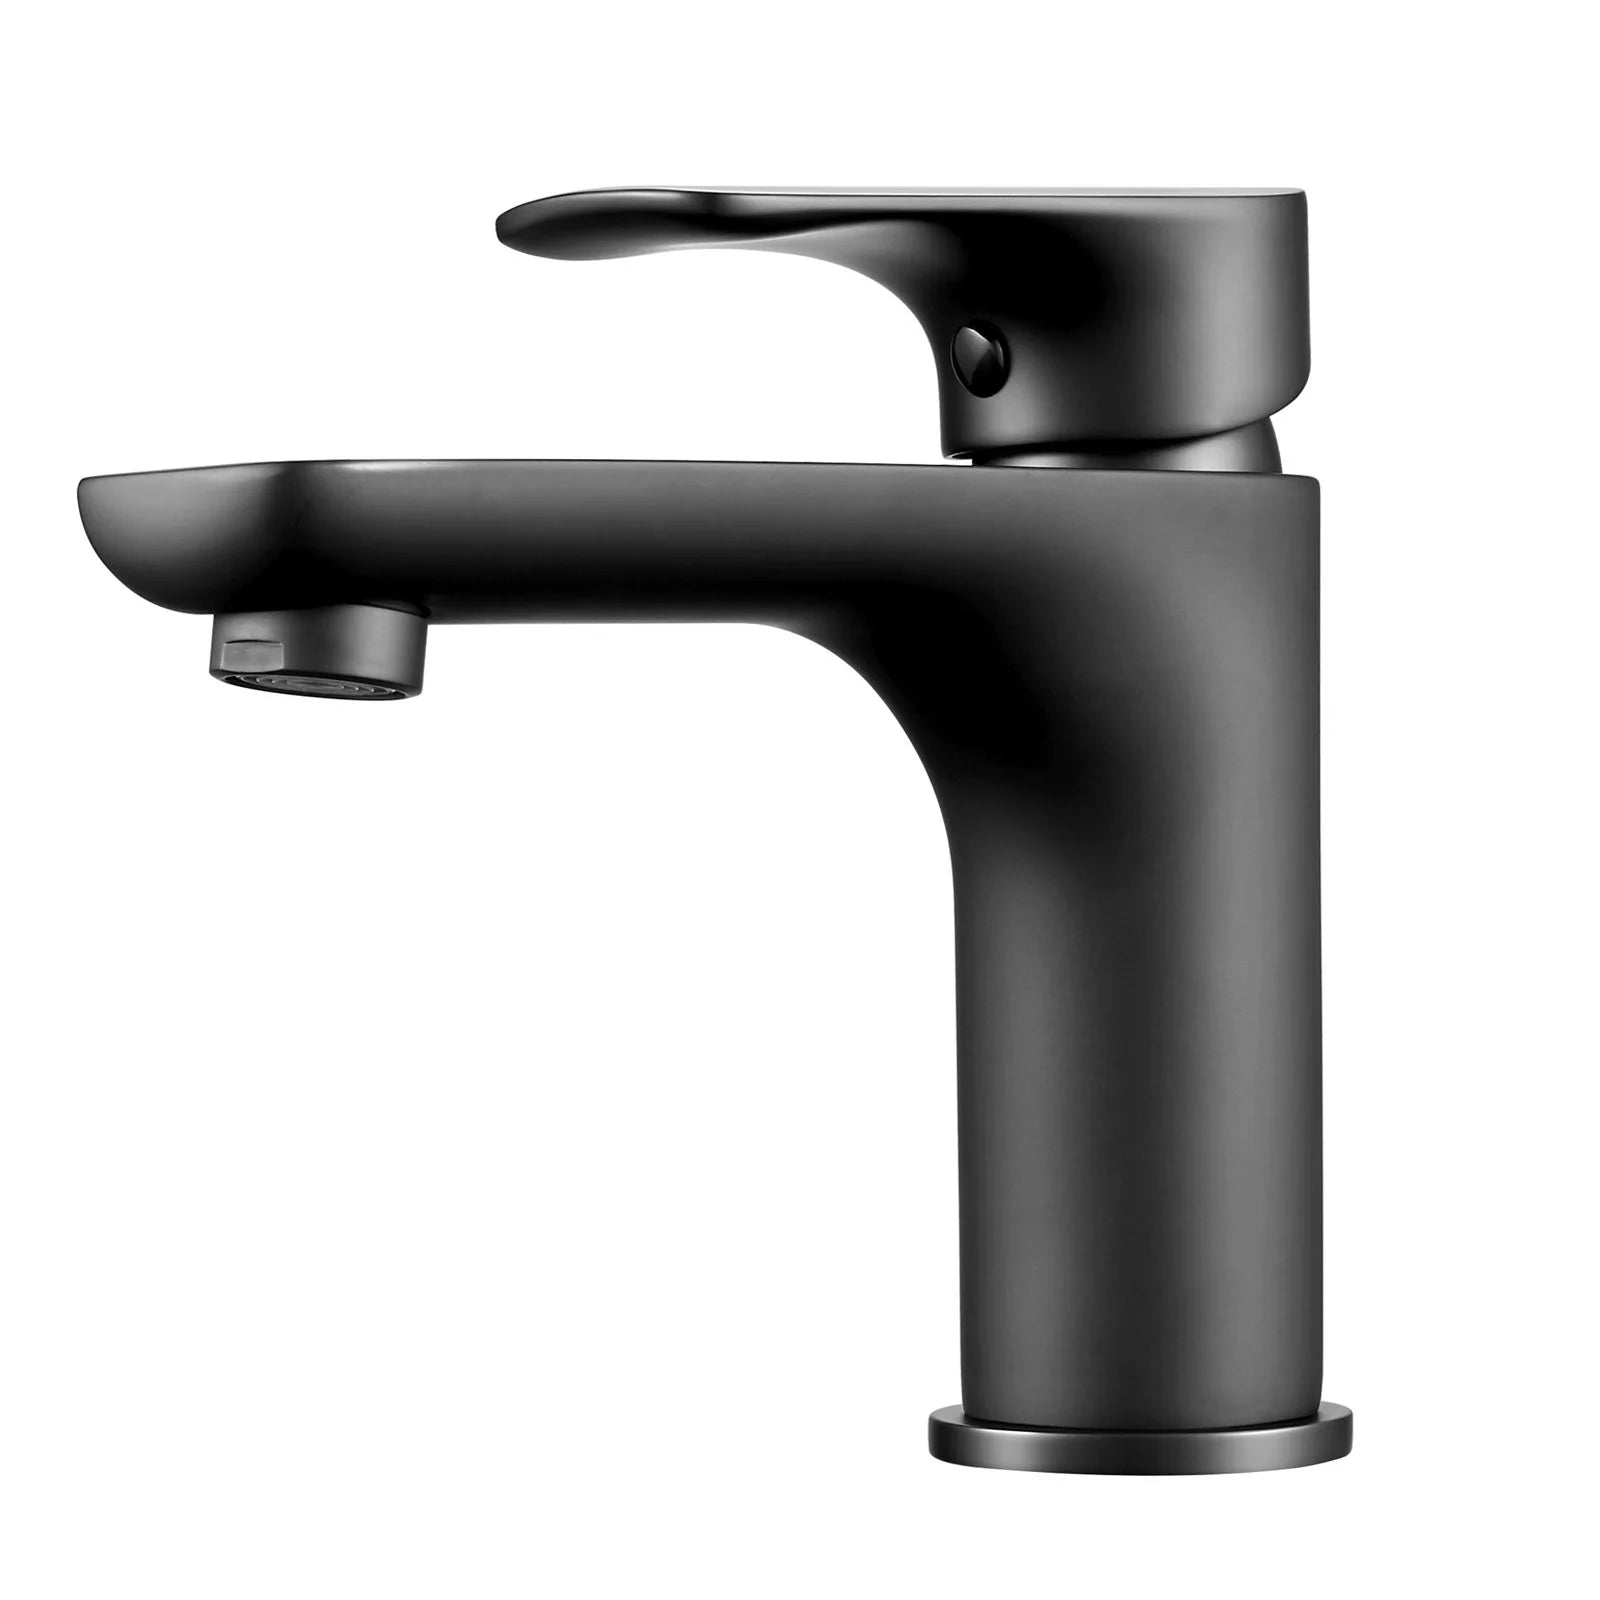 Vog Series: Stylish basin mixer tap, ideal for modern bathrooms-OX0131.BM